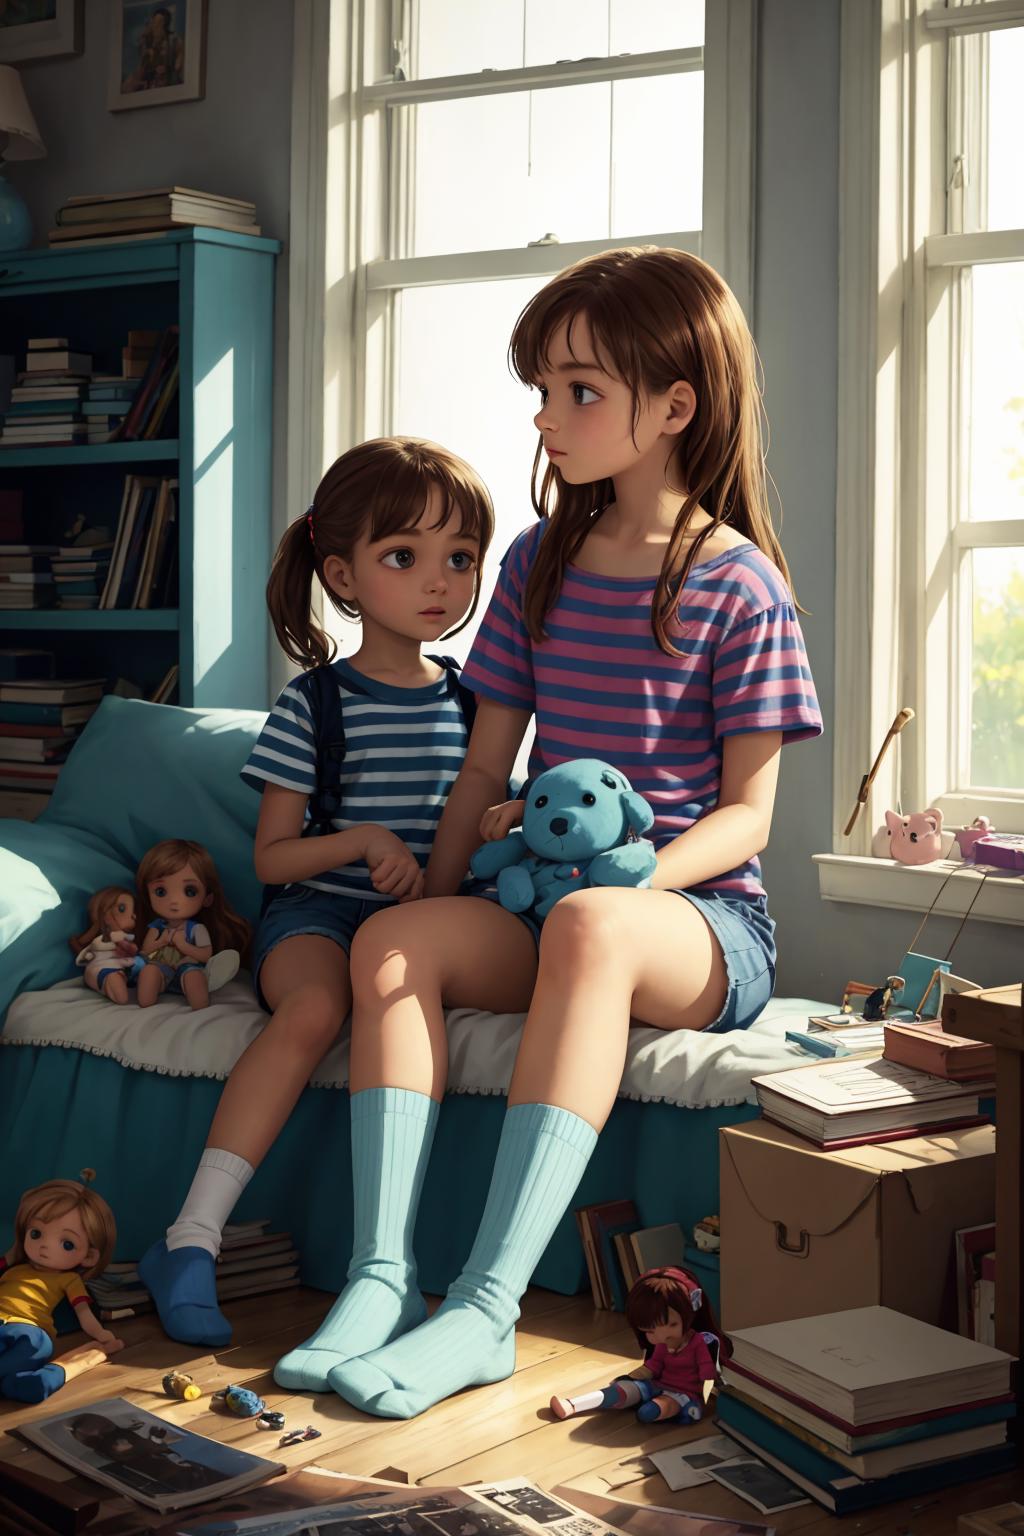 Two little girls sitting on a couch with a stuffed animal and a bookshelf behind them.